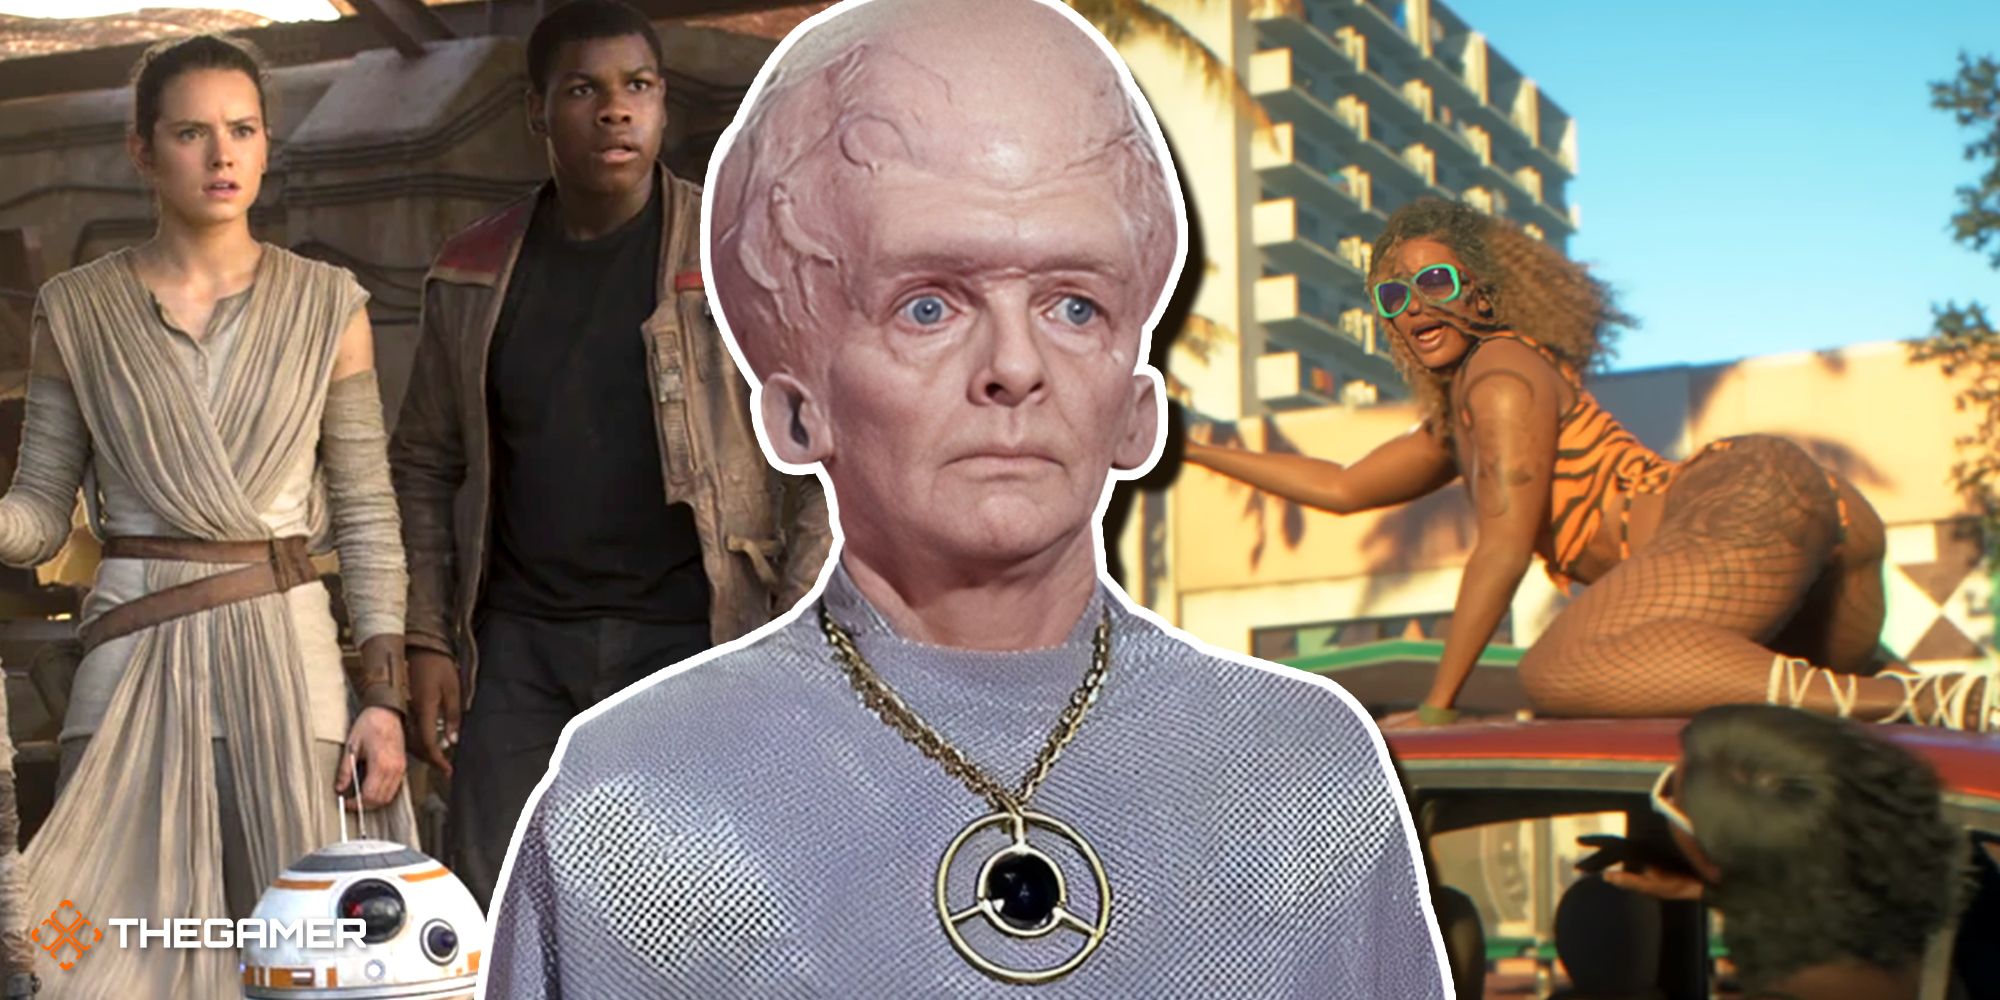 A dude with a big brain wearing a pendant in the foreground with Rey, Finn, and BB-8 on the left and the twerking woman from the GTA 6 trailer on the right.